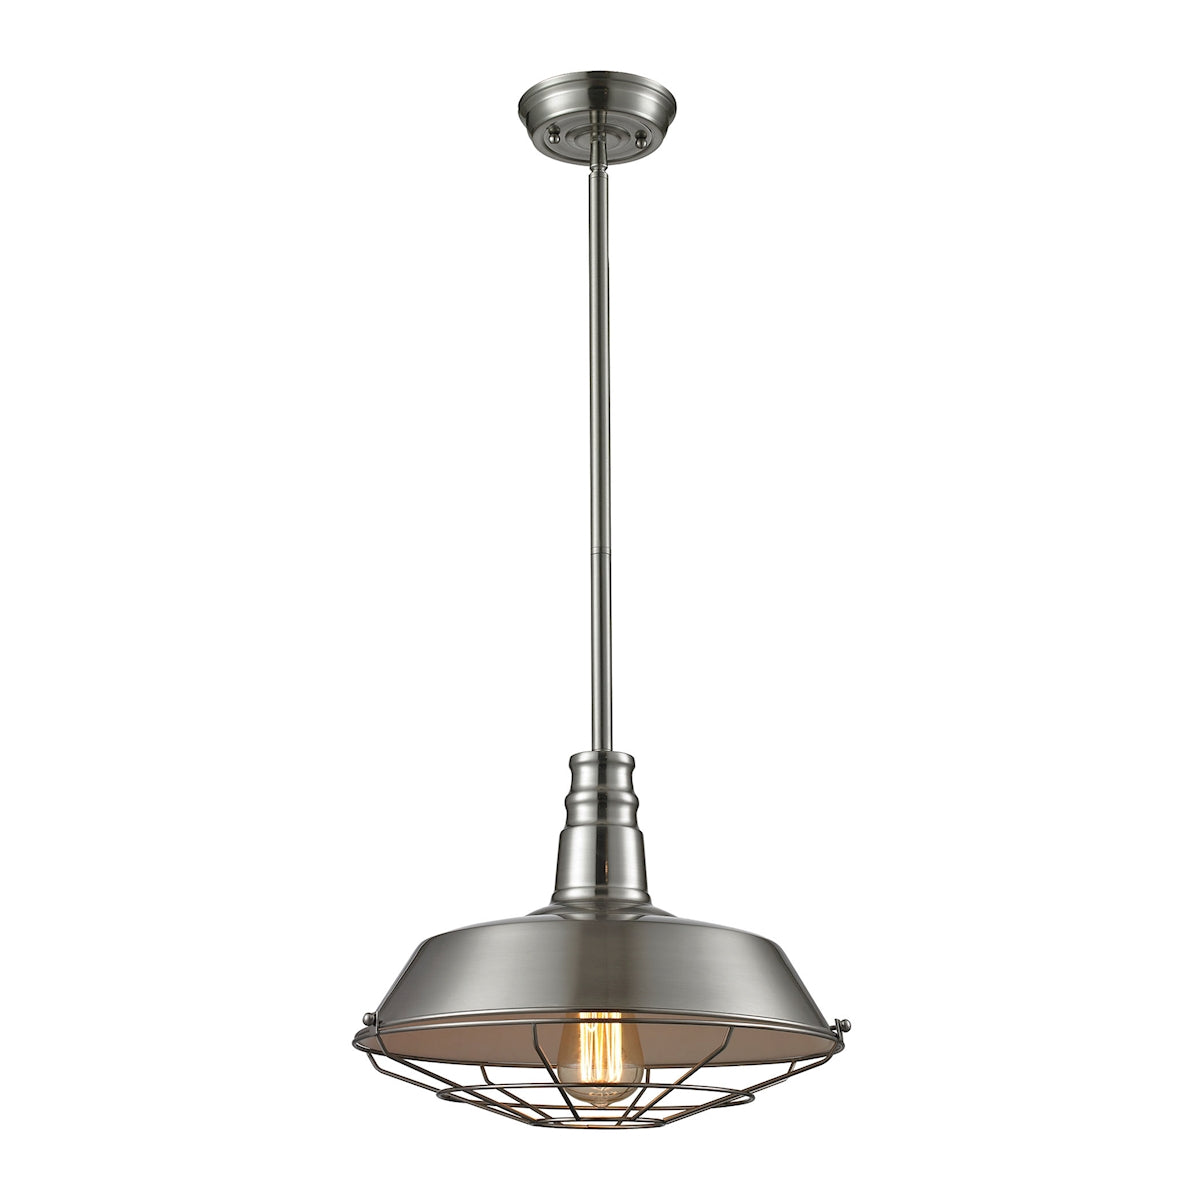 ELK Lighting 67066/1 Warehouse Pendant 1-Light Pendant in Satin Nickel with Metal Shade and Cage